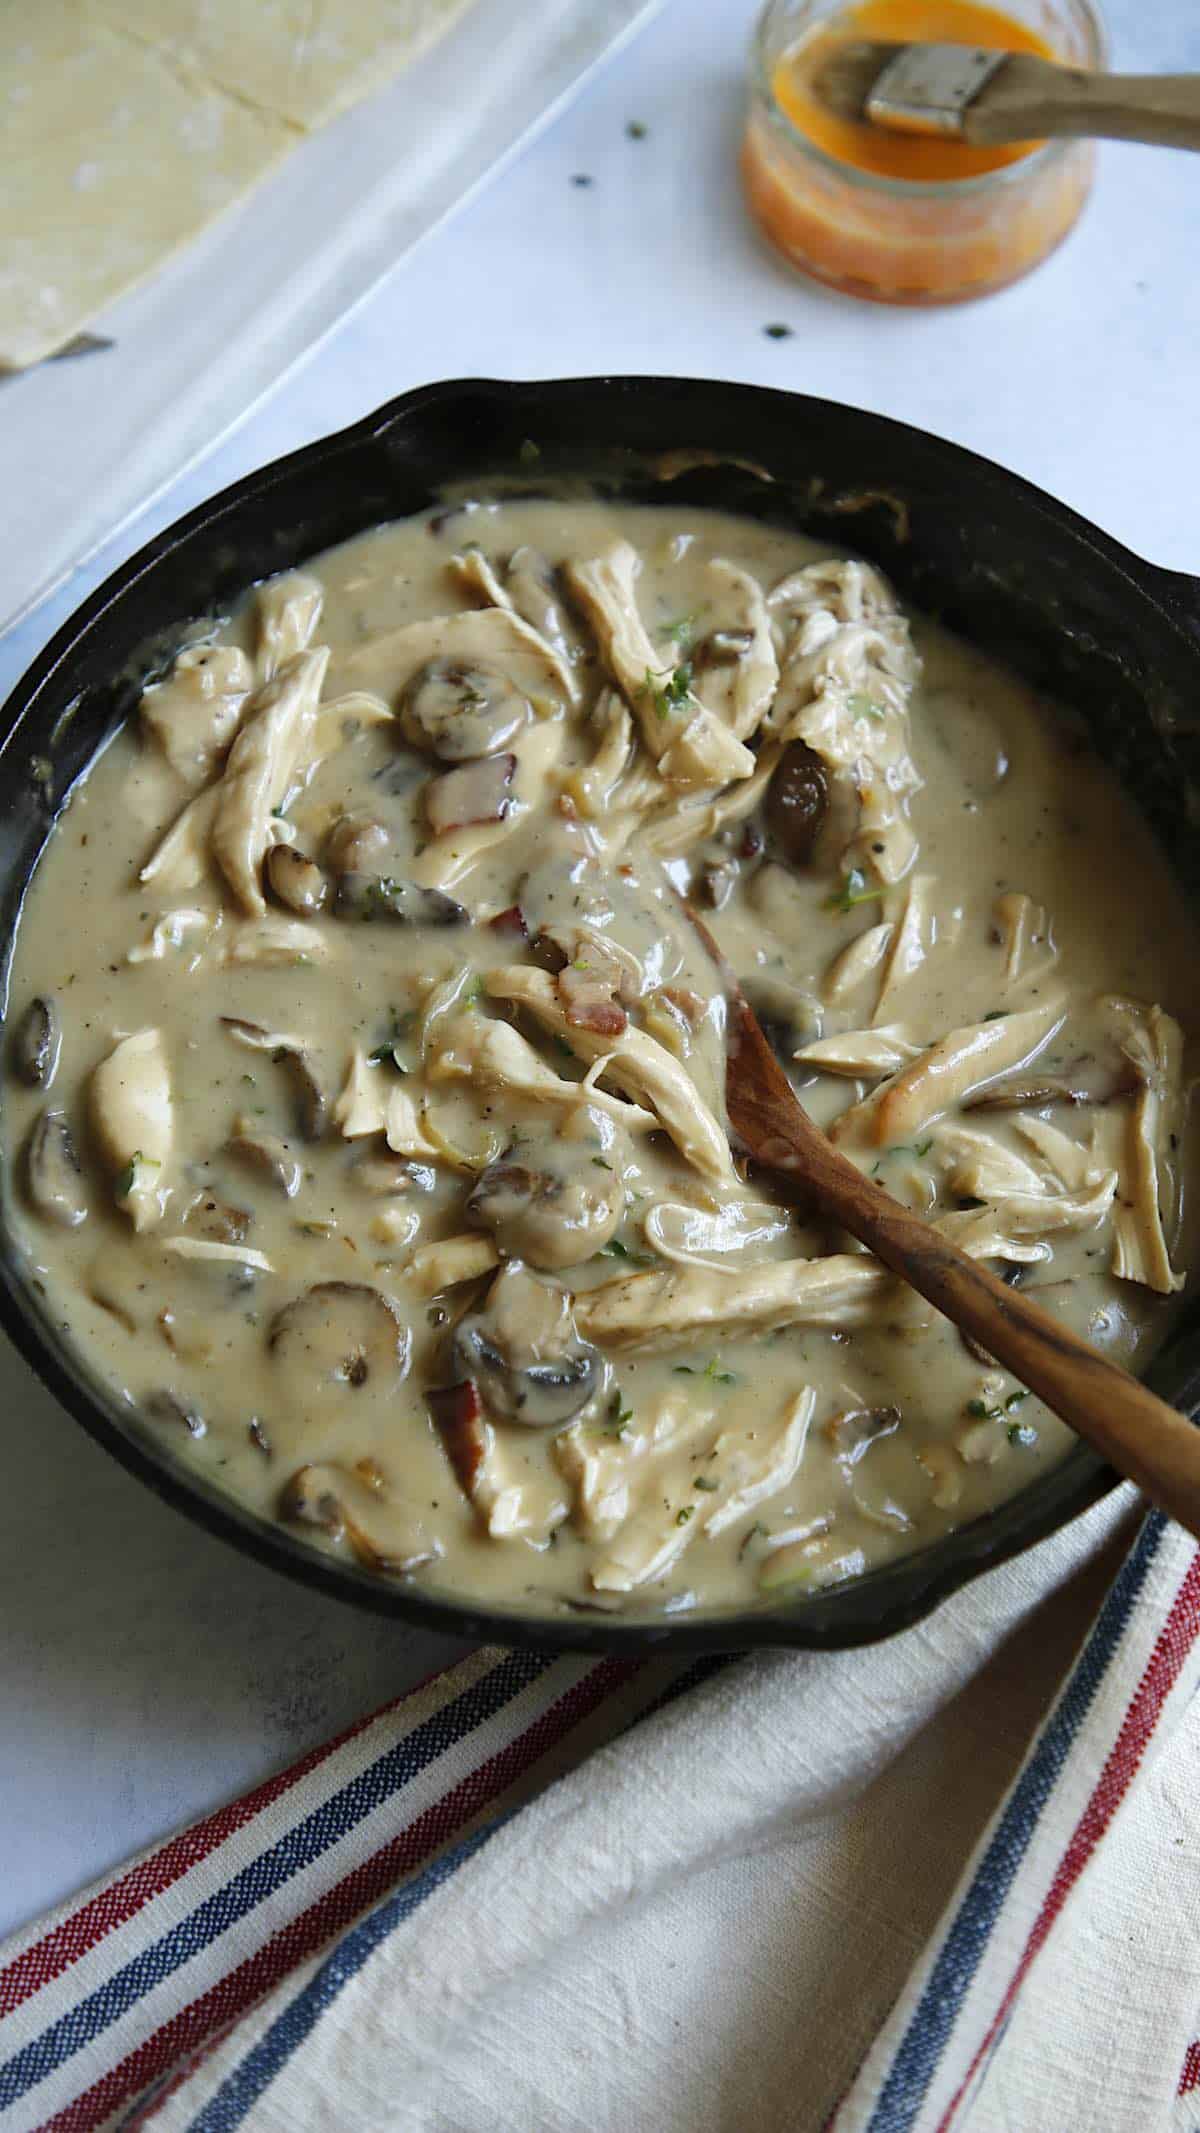 Chicken and mushrooms in a sauce in a cast ironb skillet with a wooden spoon